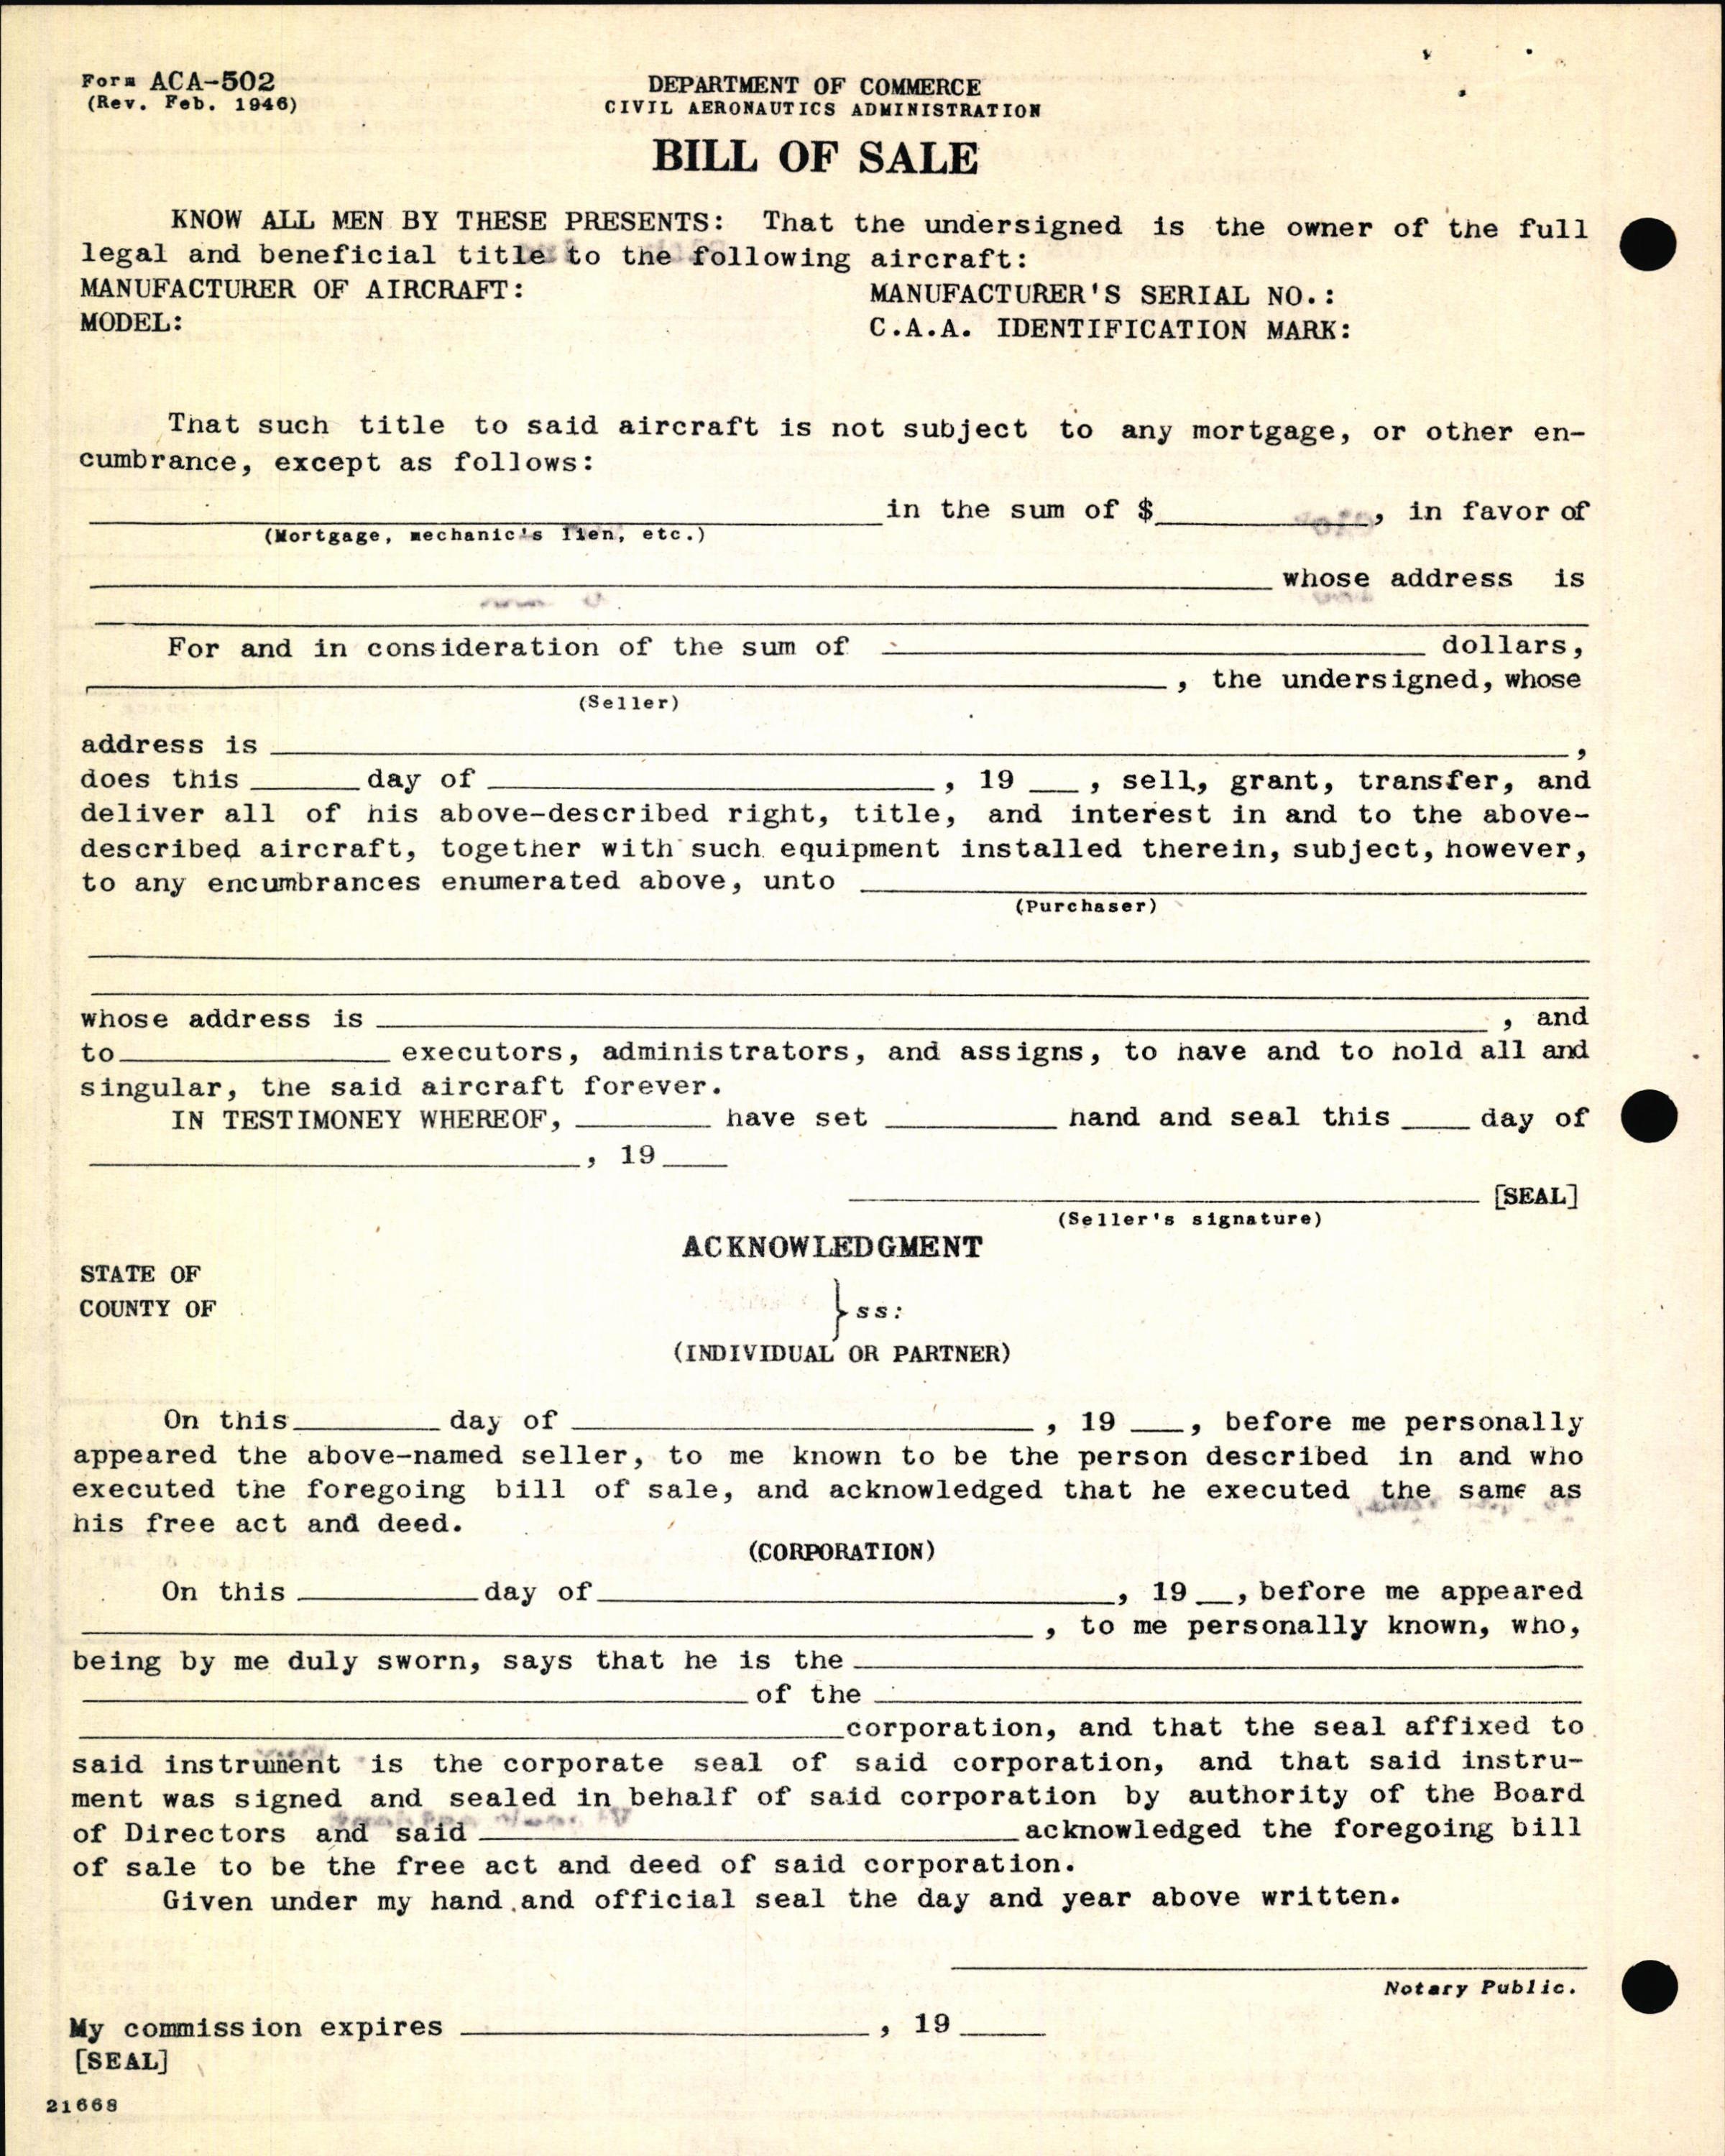 Sample page 6 from AirCorps Library document: Technical Information for Serial Number 1237